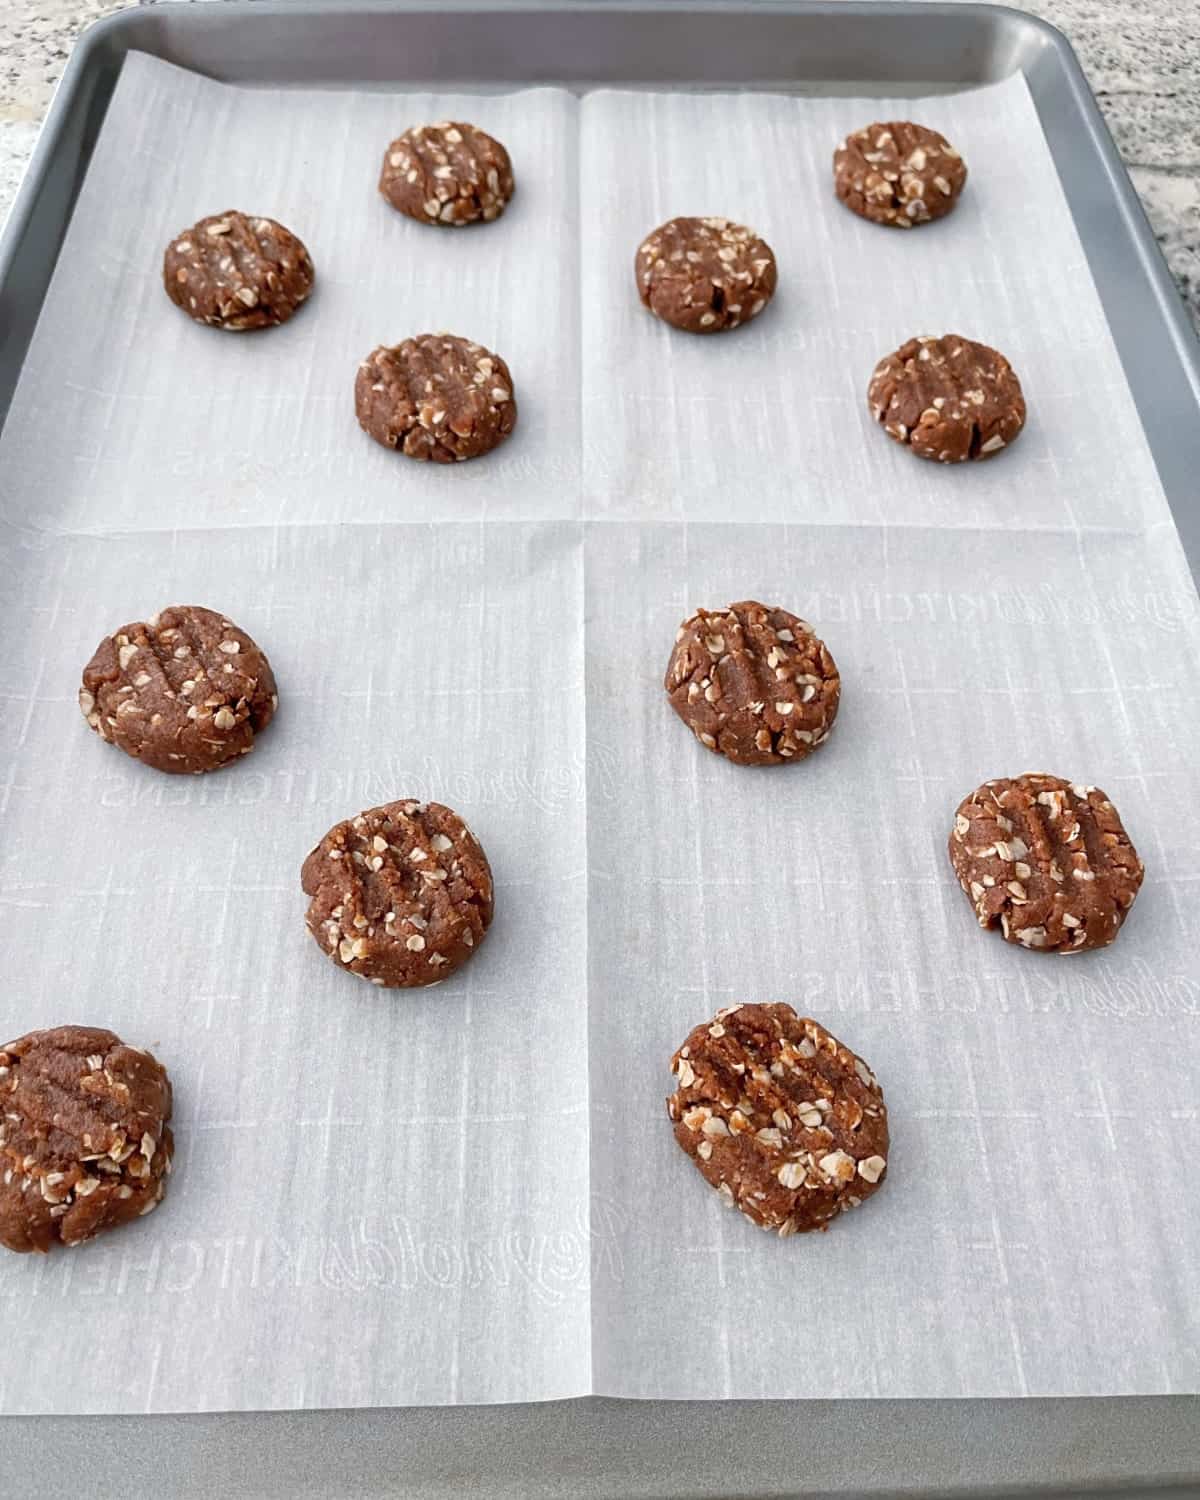 Unbaked coconut almond butter cookies on parchment-lined baking sheet.